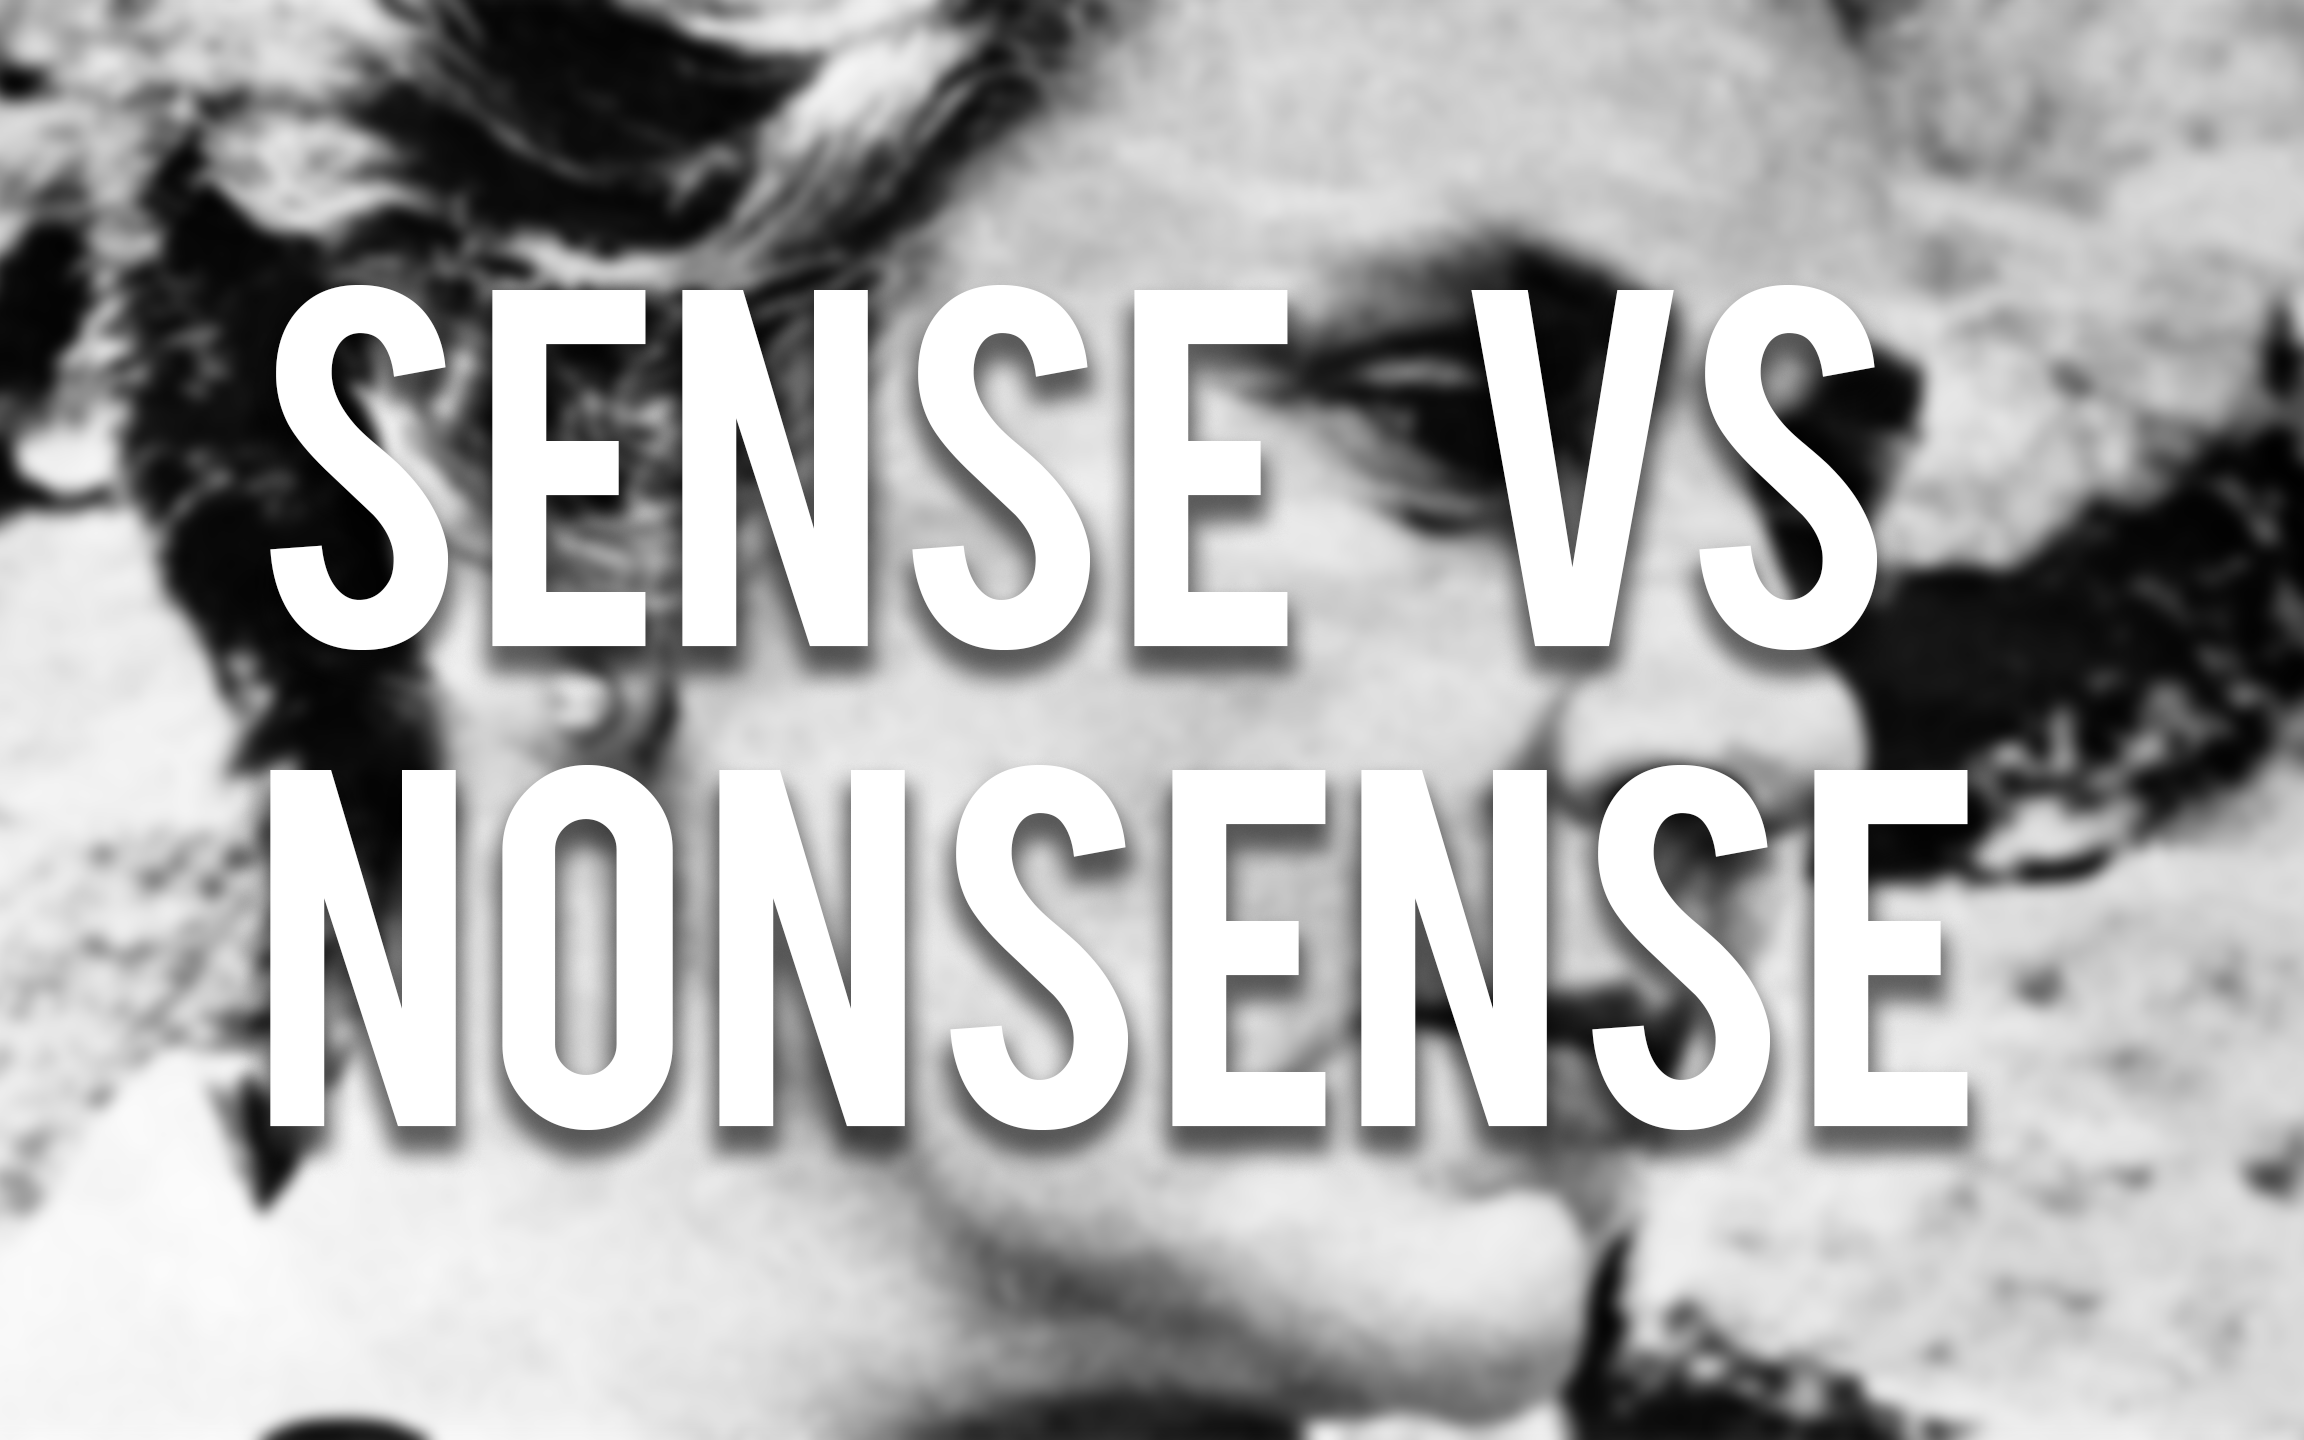 Sense/Nonsense: “The Monument” and “The Fish” by Elizabeth Bishop